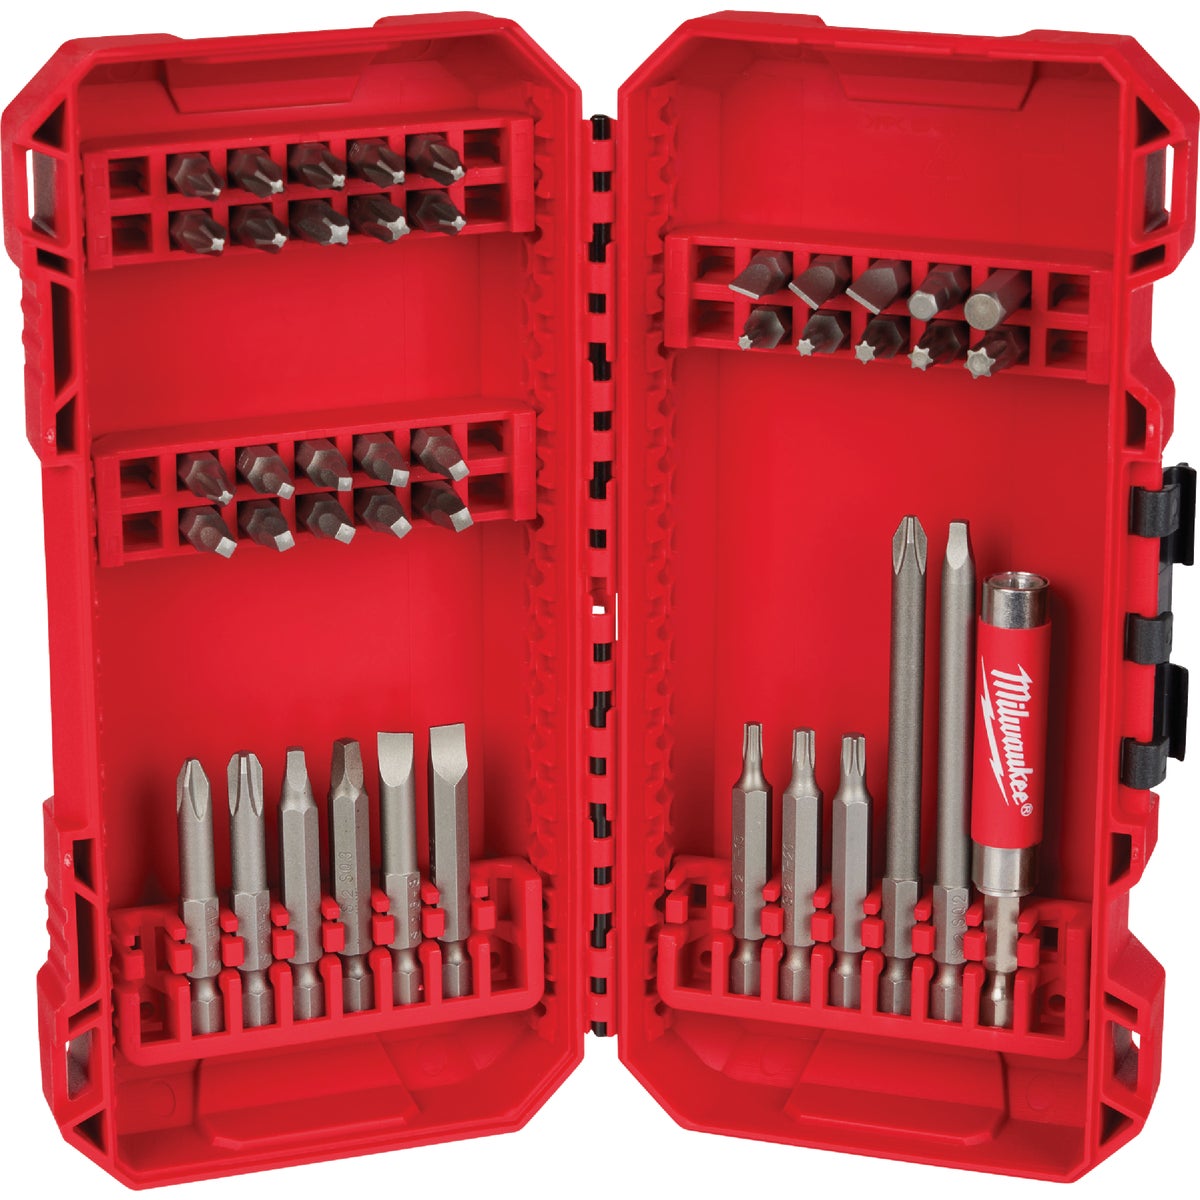 Drill and Drive Set